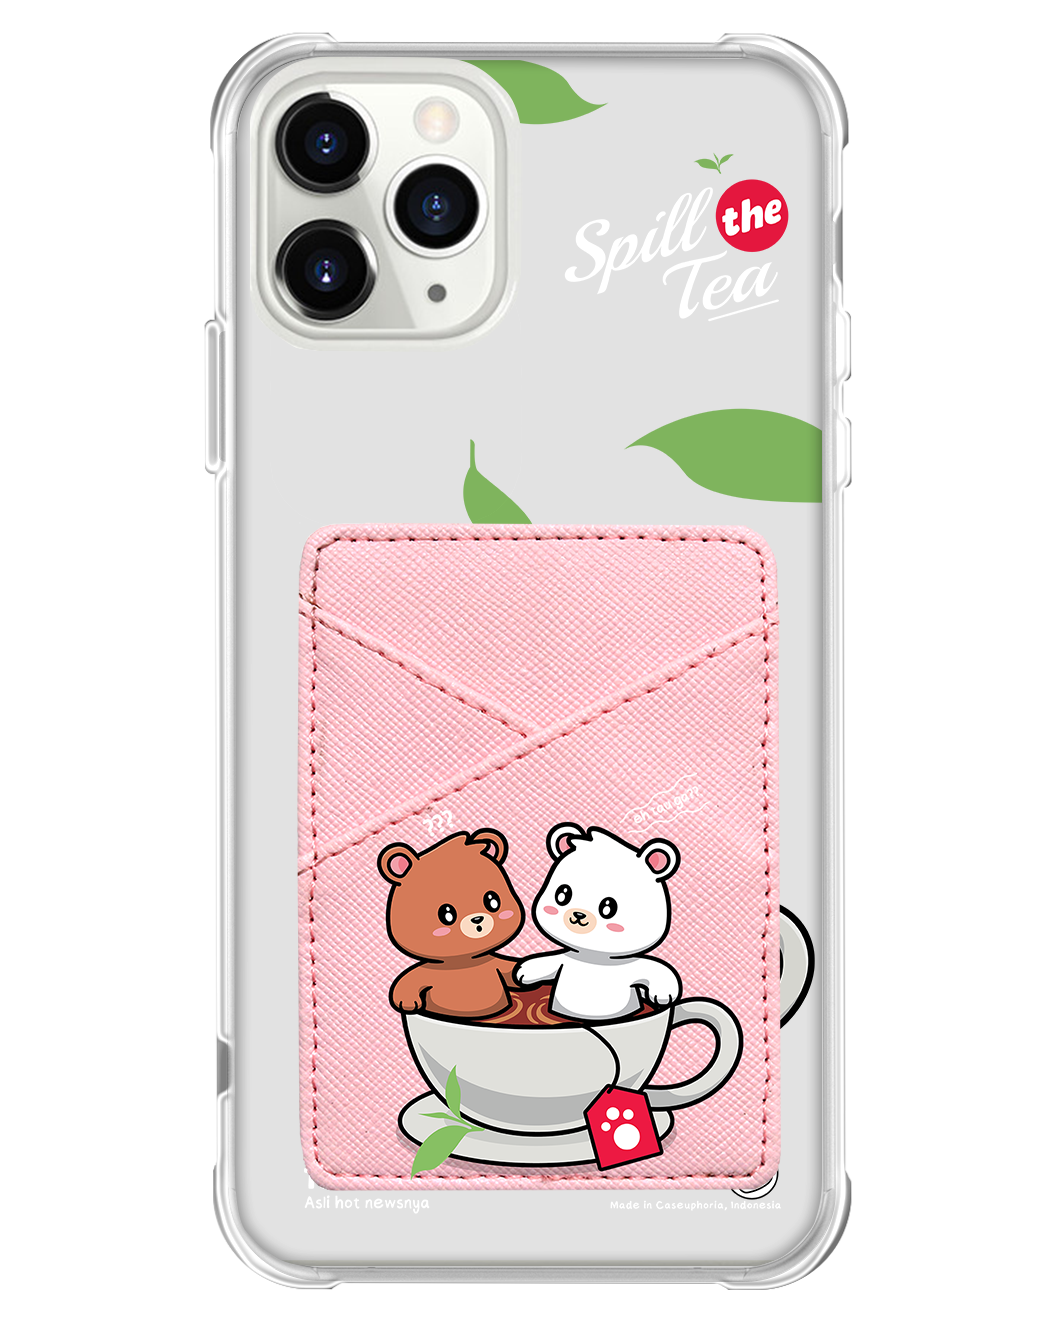 iPhone Phone Wallet Case - Spill the Tea